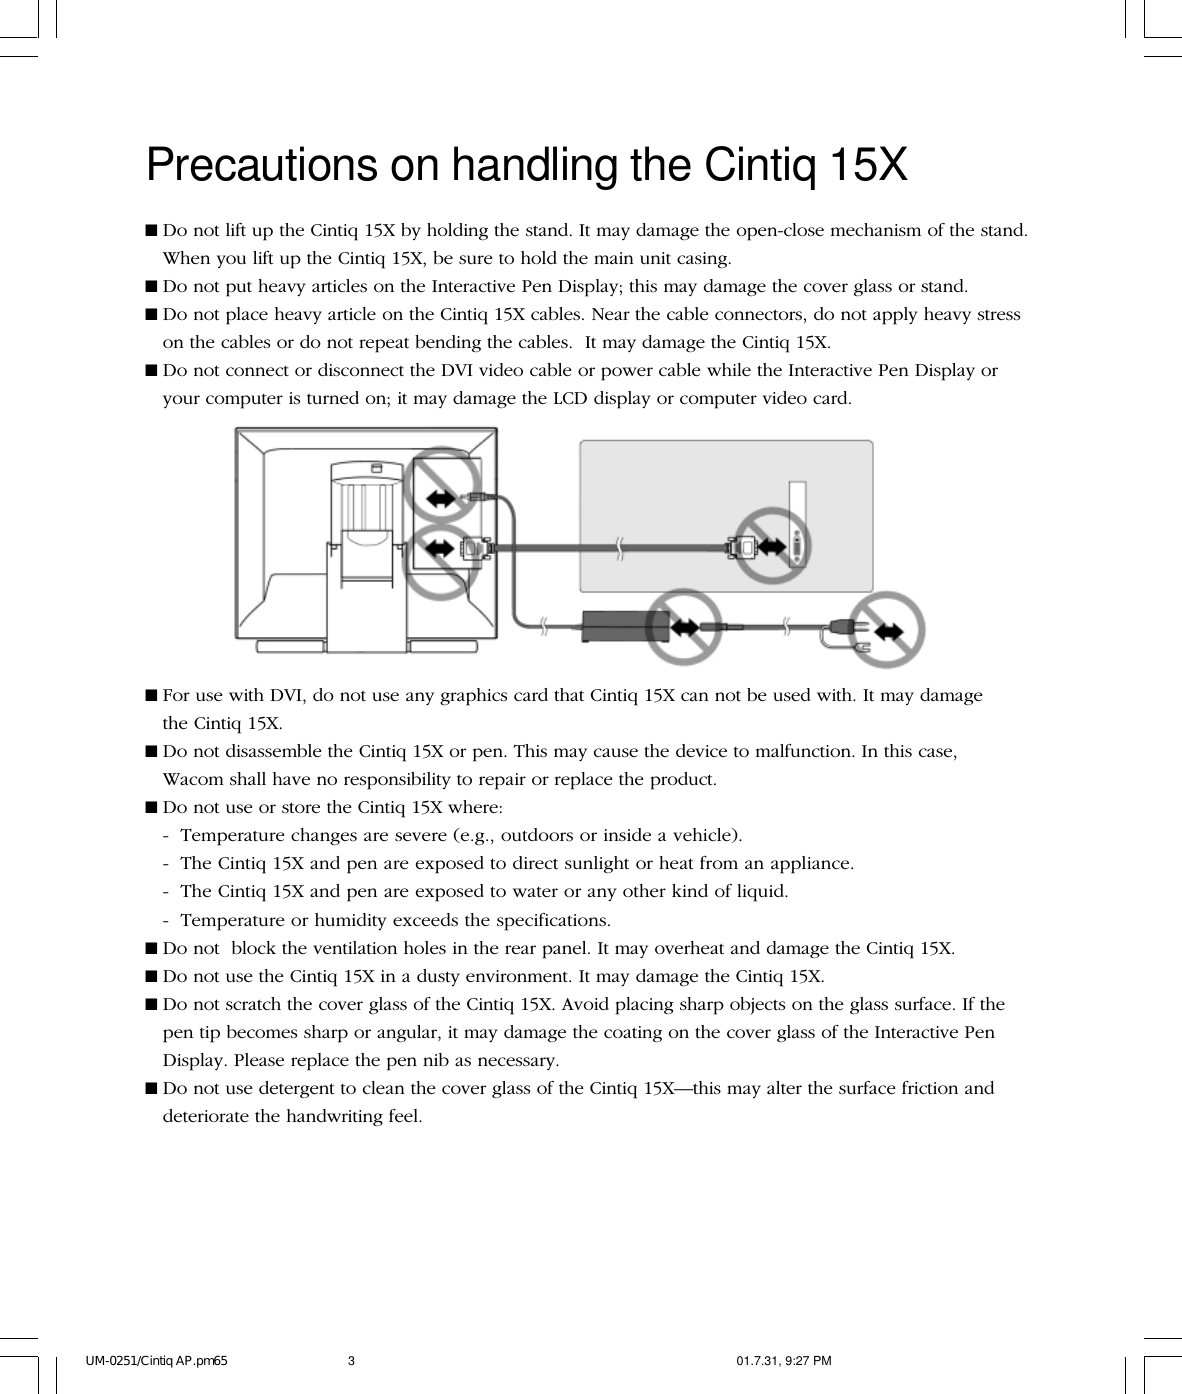 Precautions on handling the Cintiq 15X■For use with DVI, do not use any graphics card that Cintiq 15X can not be used with. It may damagethe Cintiq 15X.■Do not disassemble the Cintiq 15X or pen. This may cause the device to malfunction. In this case,Wacom shall have no responsibility to repair or replace the product.■Do not use or store the Cintiq 15X where:- Temperature changes are severe (e.g., outdoors or inside a vehicle).- The Cintiq 15X and pen are exposed to direct sunlight or heat from an appliance.- The Cintiq 15X and pen are exposed to water or any other kind of liquid.- Temperature or humidity exceeds the specifications.■Do not  block the ventilation holes in the rear panel. It may overheat and damage the Cintiq 15X.■Do not use the Cintiq 15X in a dusty environment. It may damage the Cintiq 15X.■Do not scratch the cover glass of the Cintiq 15X. Avoid placing sharp objects on the glass surface. If thepen tip becomes sharp or angular, it may damage the coating on the cover glass of the Interactive PenDisplay. Please replace the pen nib as necessary.■Do not use detergent to clean the cover glass of the Cintiq 15X—this may alter the surface friction anddeteriorate the handwriting feel.■Do not lift up the Cintiq 15X by holding the stand. It may damage the open-close mechanism of the stand.When you lift up the Cintiq 15X, be sure to hold the main unit casing.■Do not put heavy articles on the Interactive Pen Display; this may damage the cover glass or stand.■Do not place heavy article on the Cintiq 15X cables. Near the cable connectors, do not apply heavy stresson the cables or do not repeat bending the cables.  It may damage the Cintiq 15X.■Do not connect or disconnect the DVI video cable or power cable while the Interactive Pen Display oryour computer is turned on; it may damage the LCD display or computer video card.UM-0251/Cintiq AP.pm65 01.7.31, 9:27 PM3